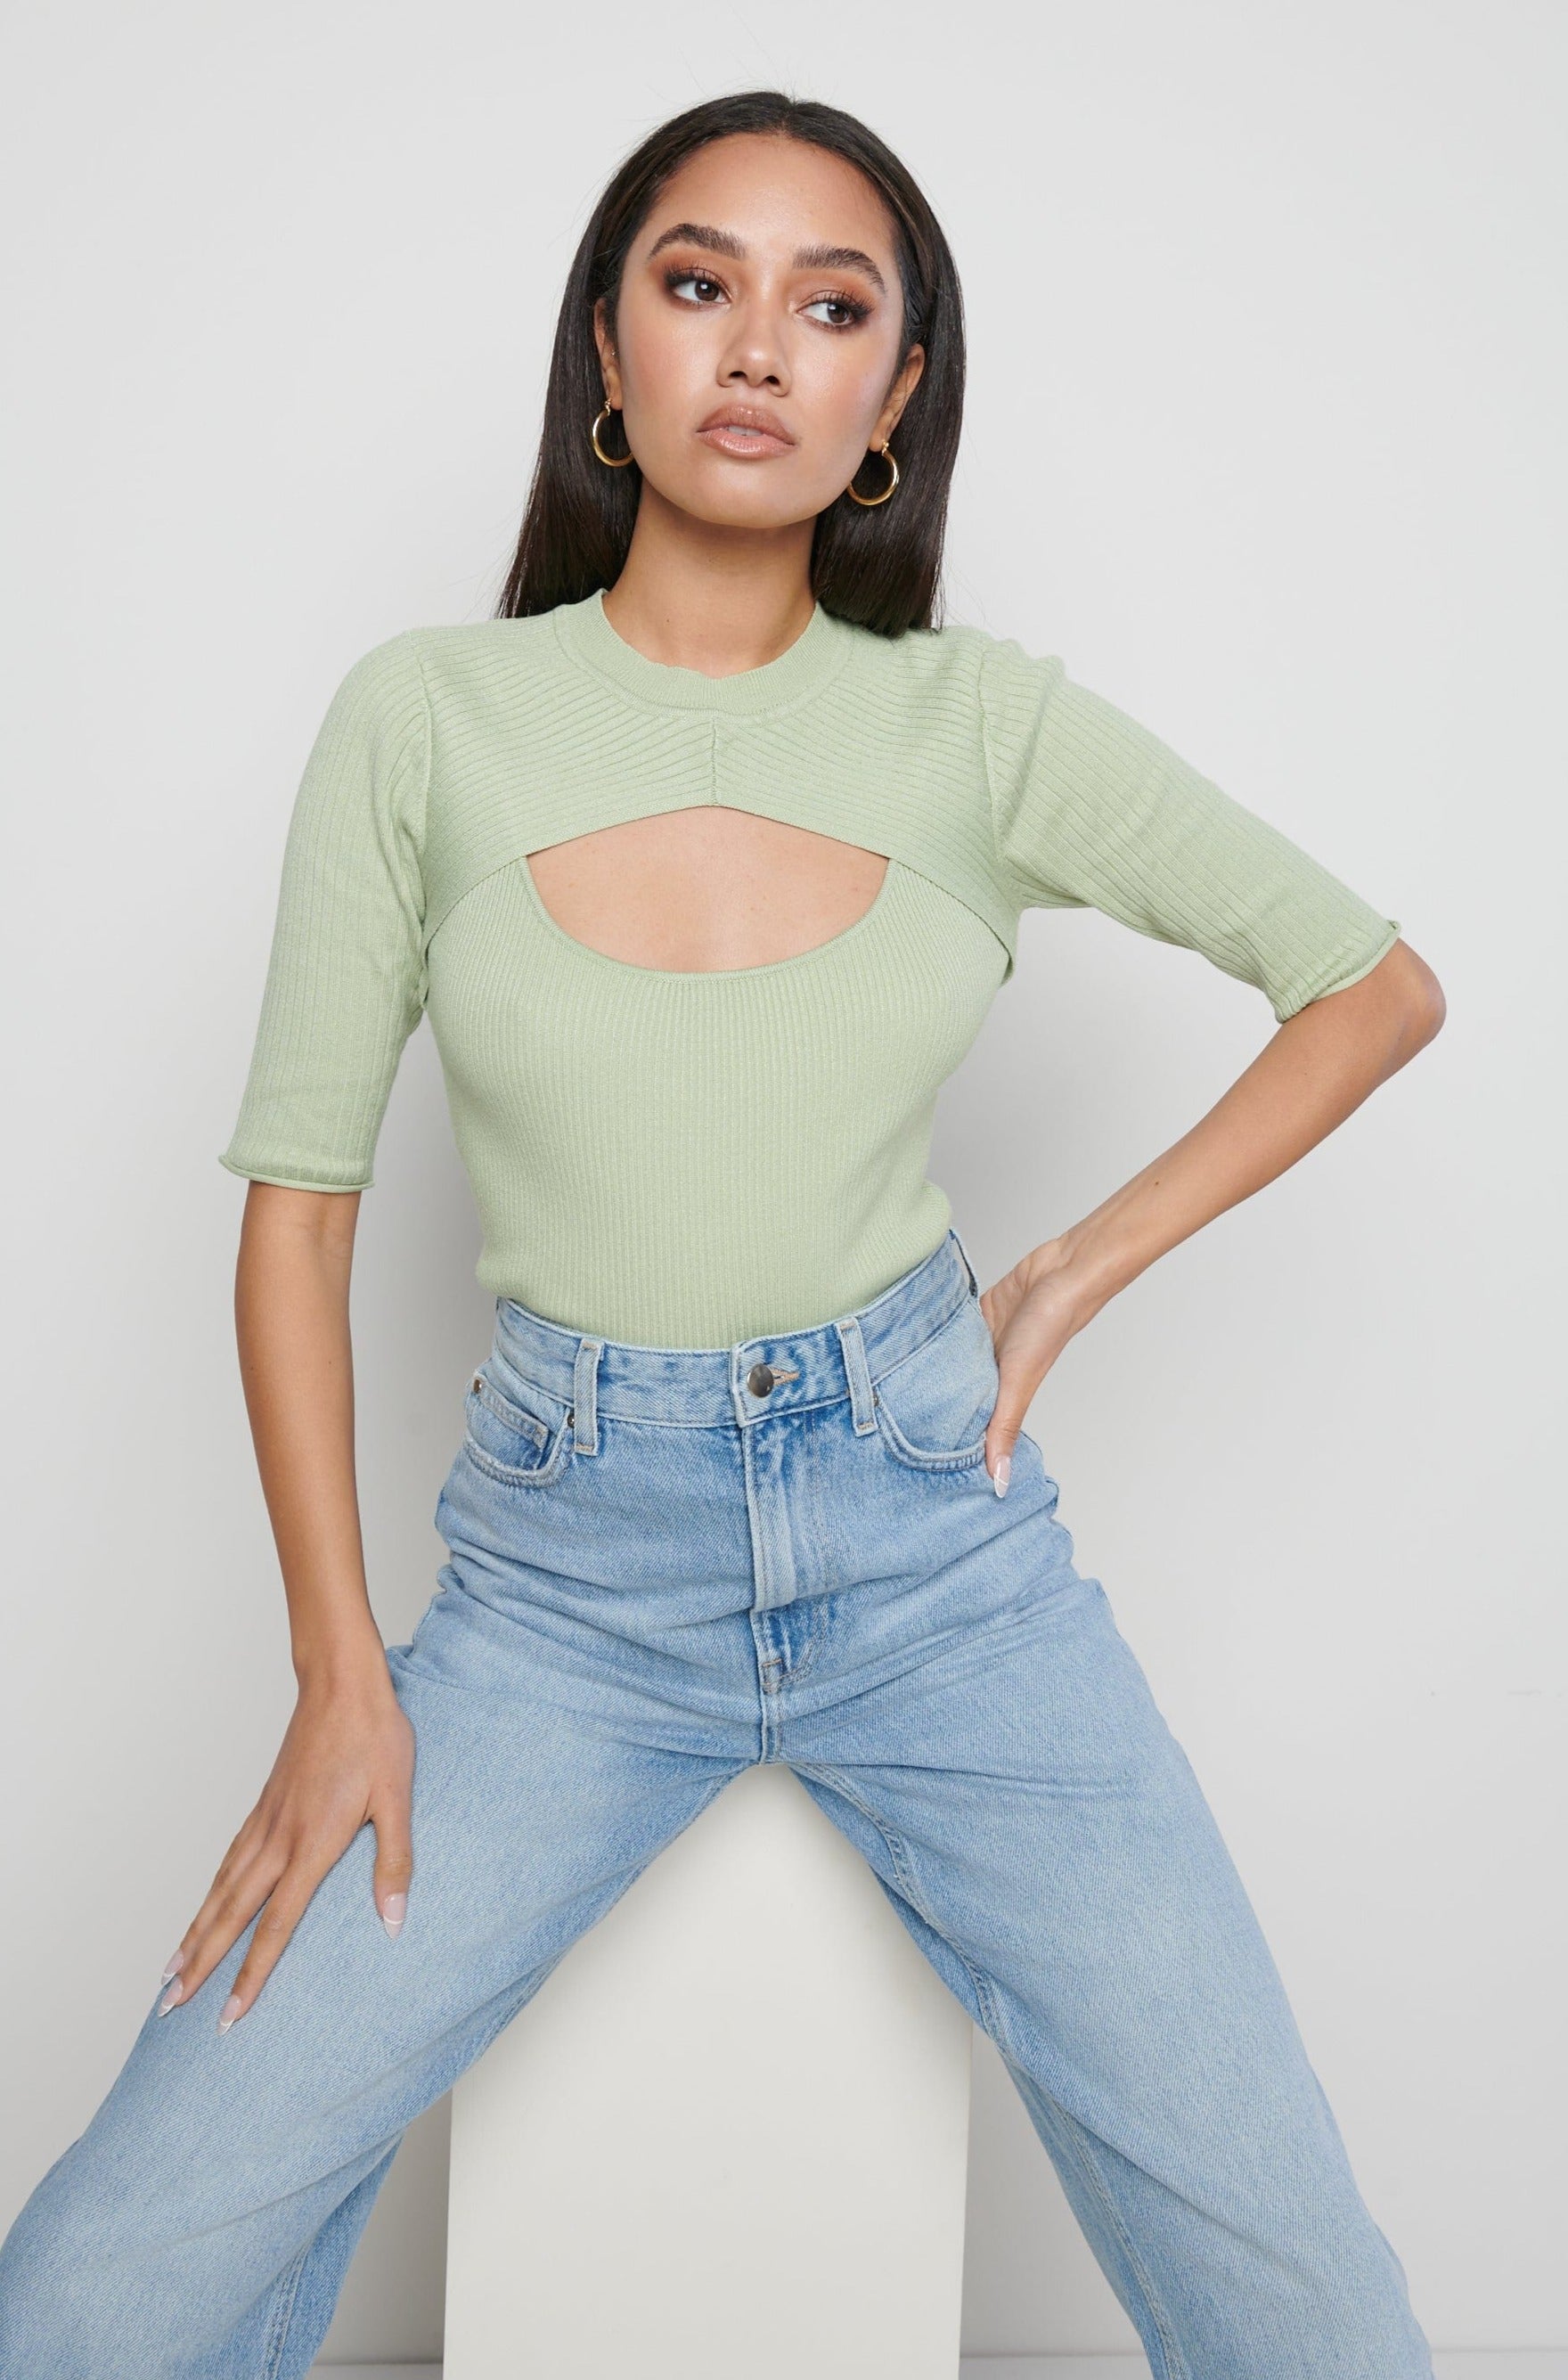 Serena Cut Out Knit Top - Mint, S